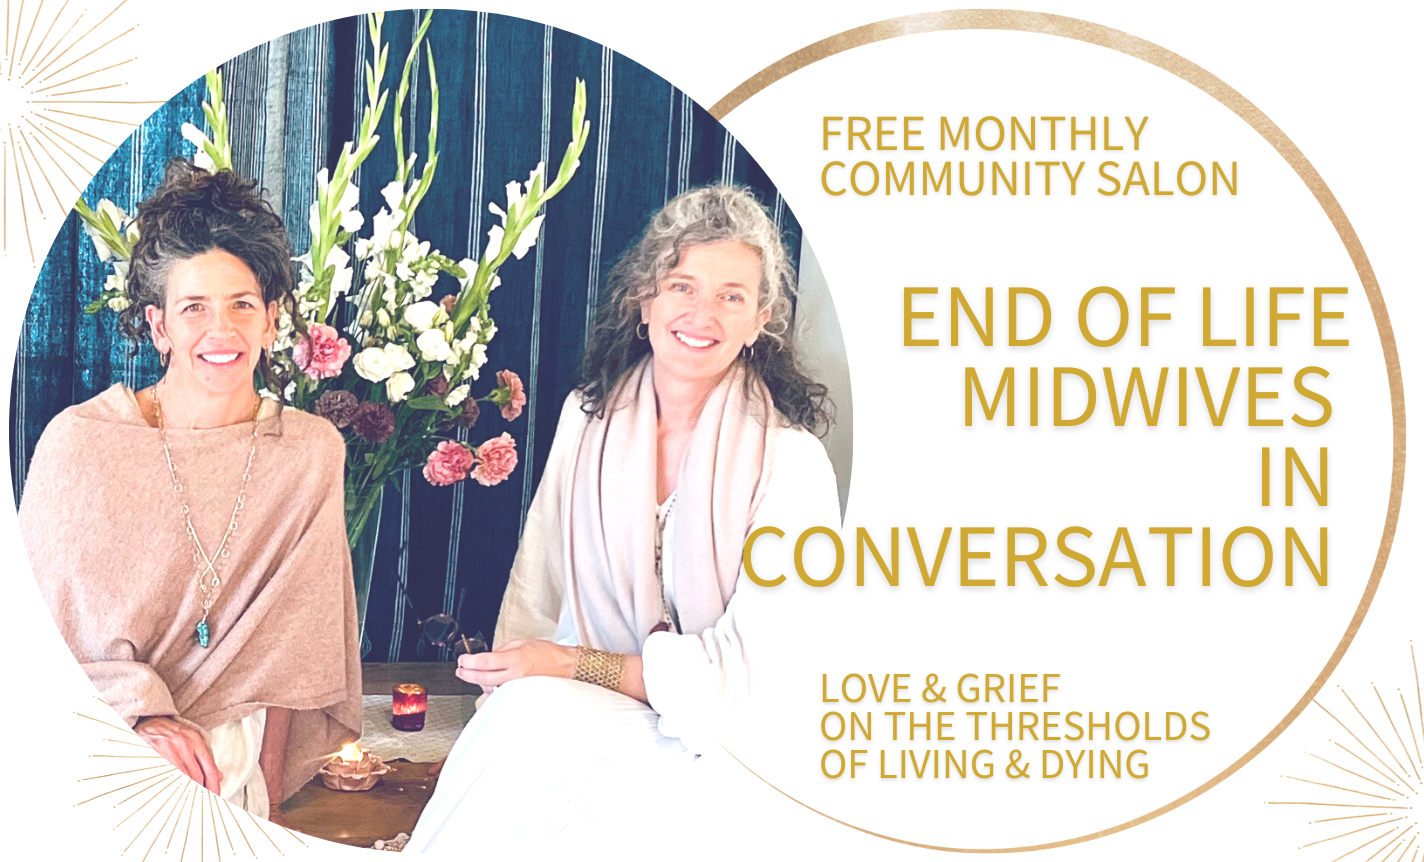 End Of Life Midwives In Conversation